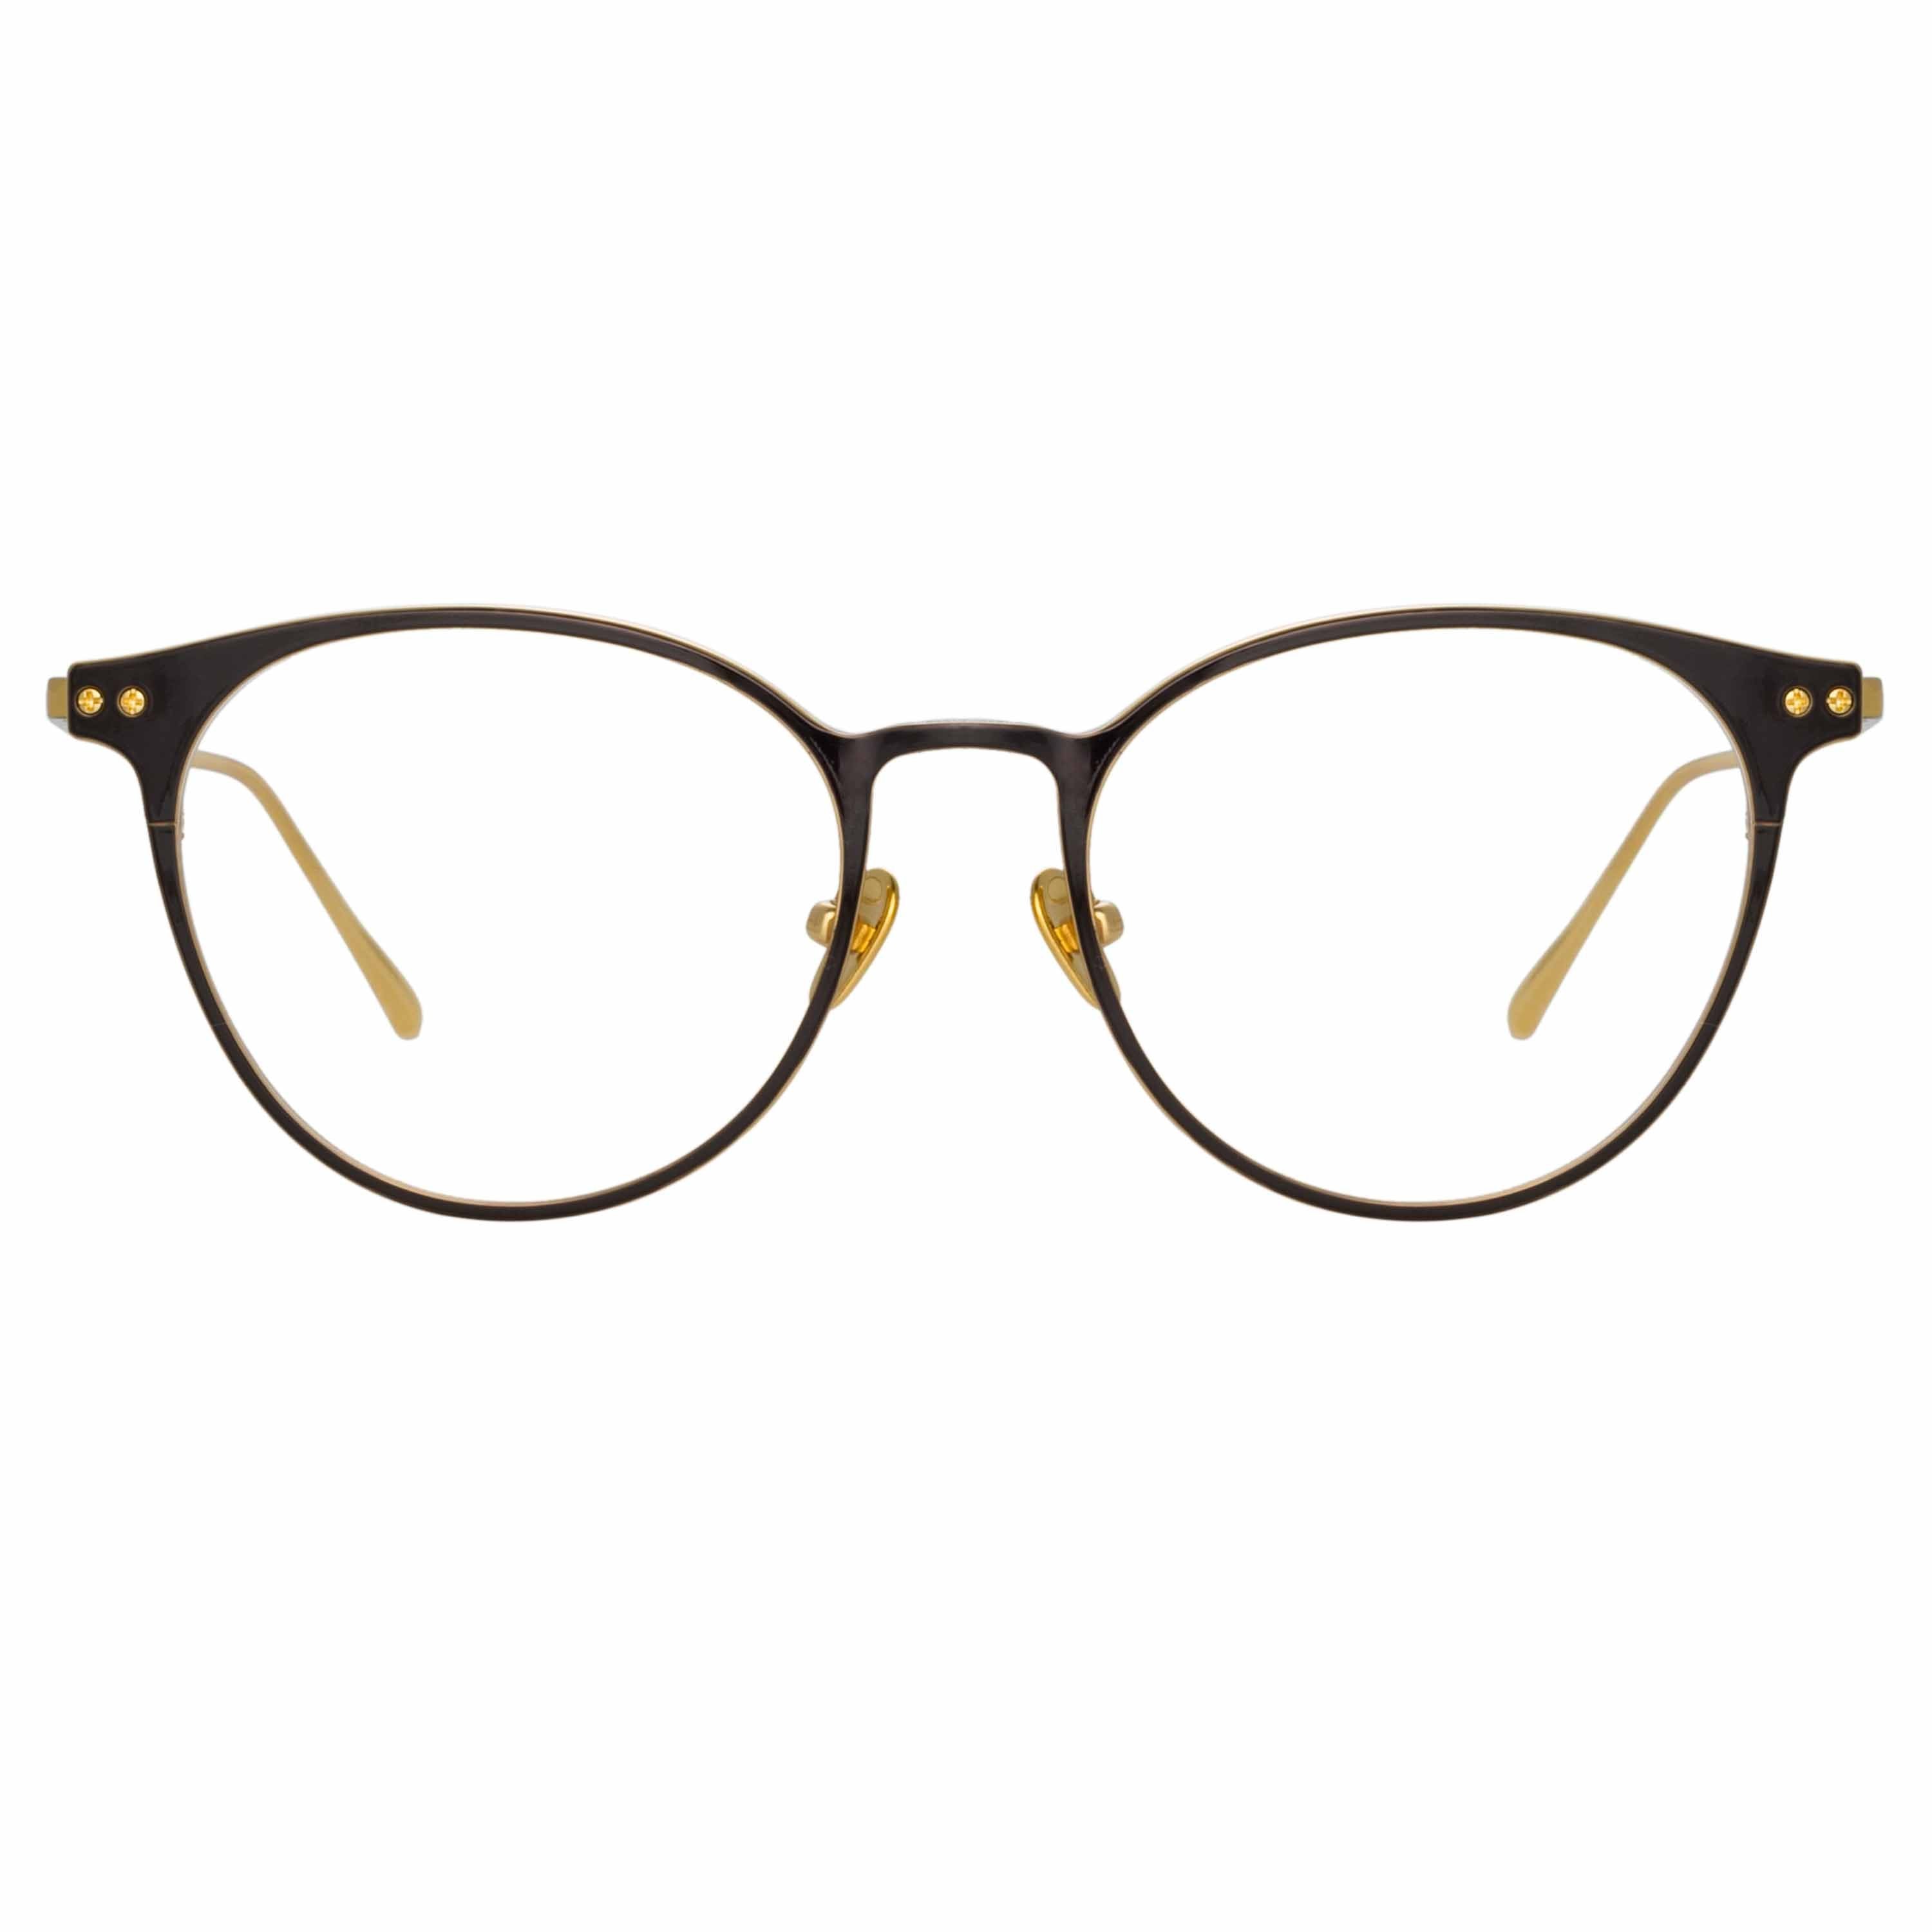 Color_LFL1186C1OPT - Ricci Cat Eye Optical Frame in Yellow Gold and Black